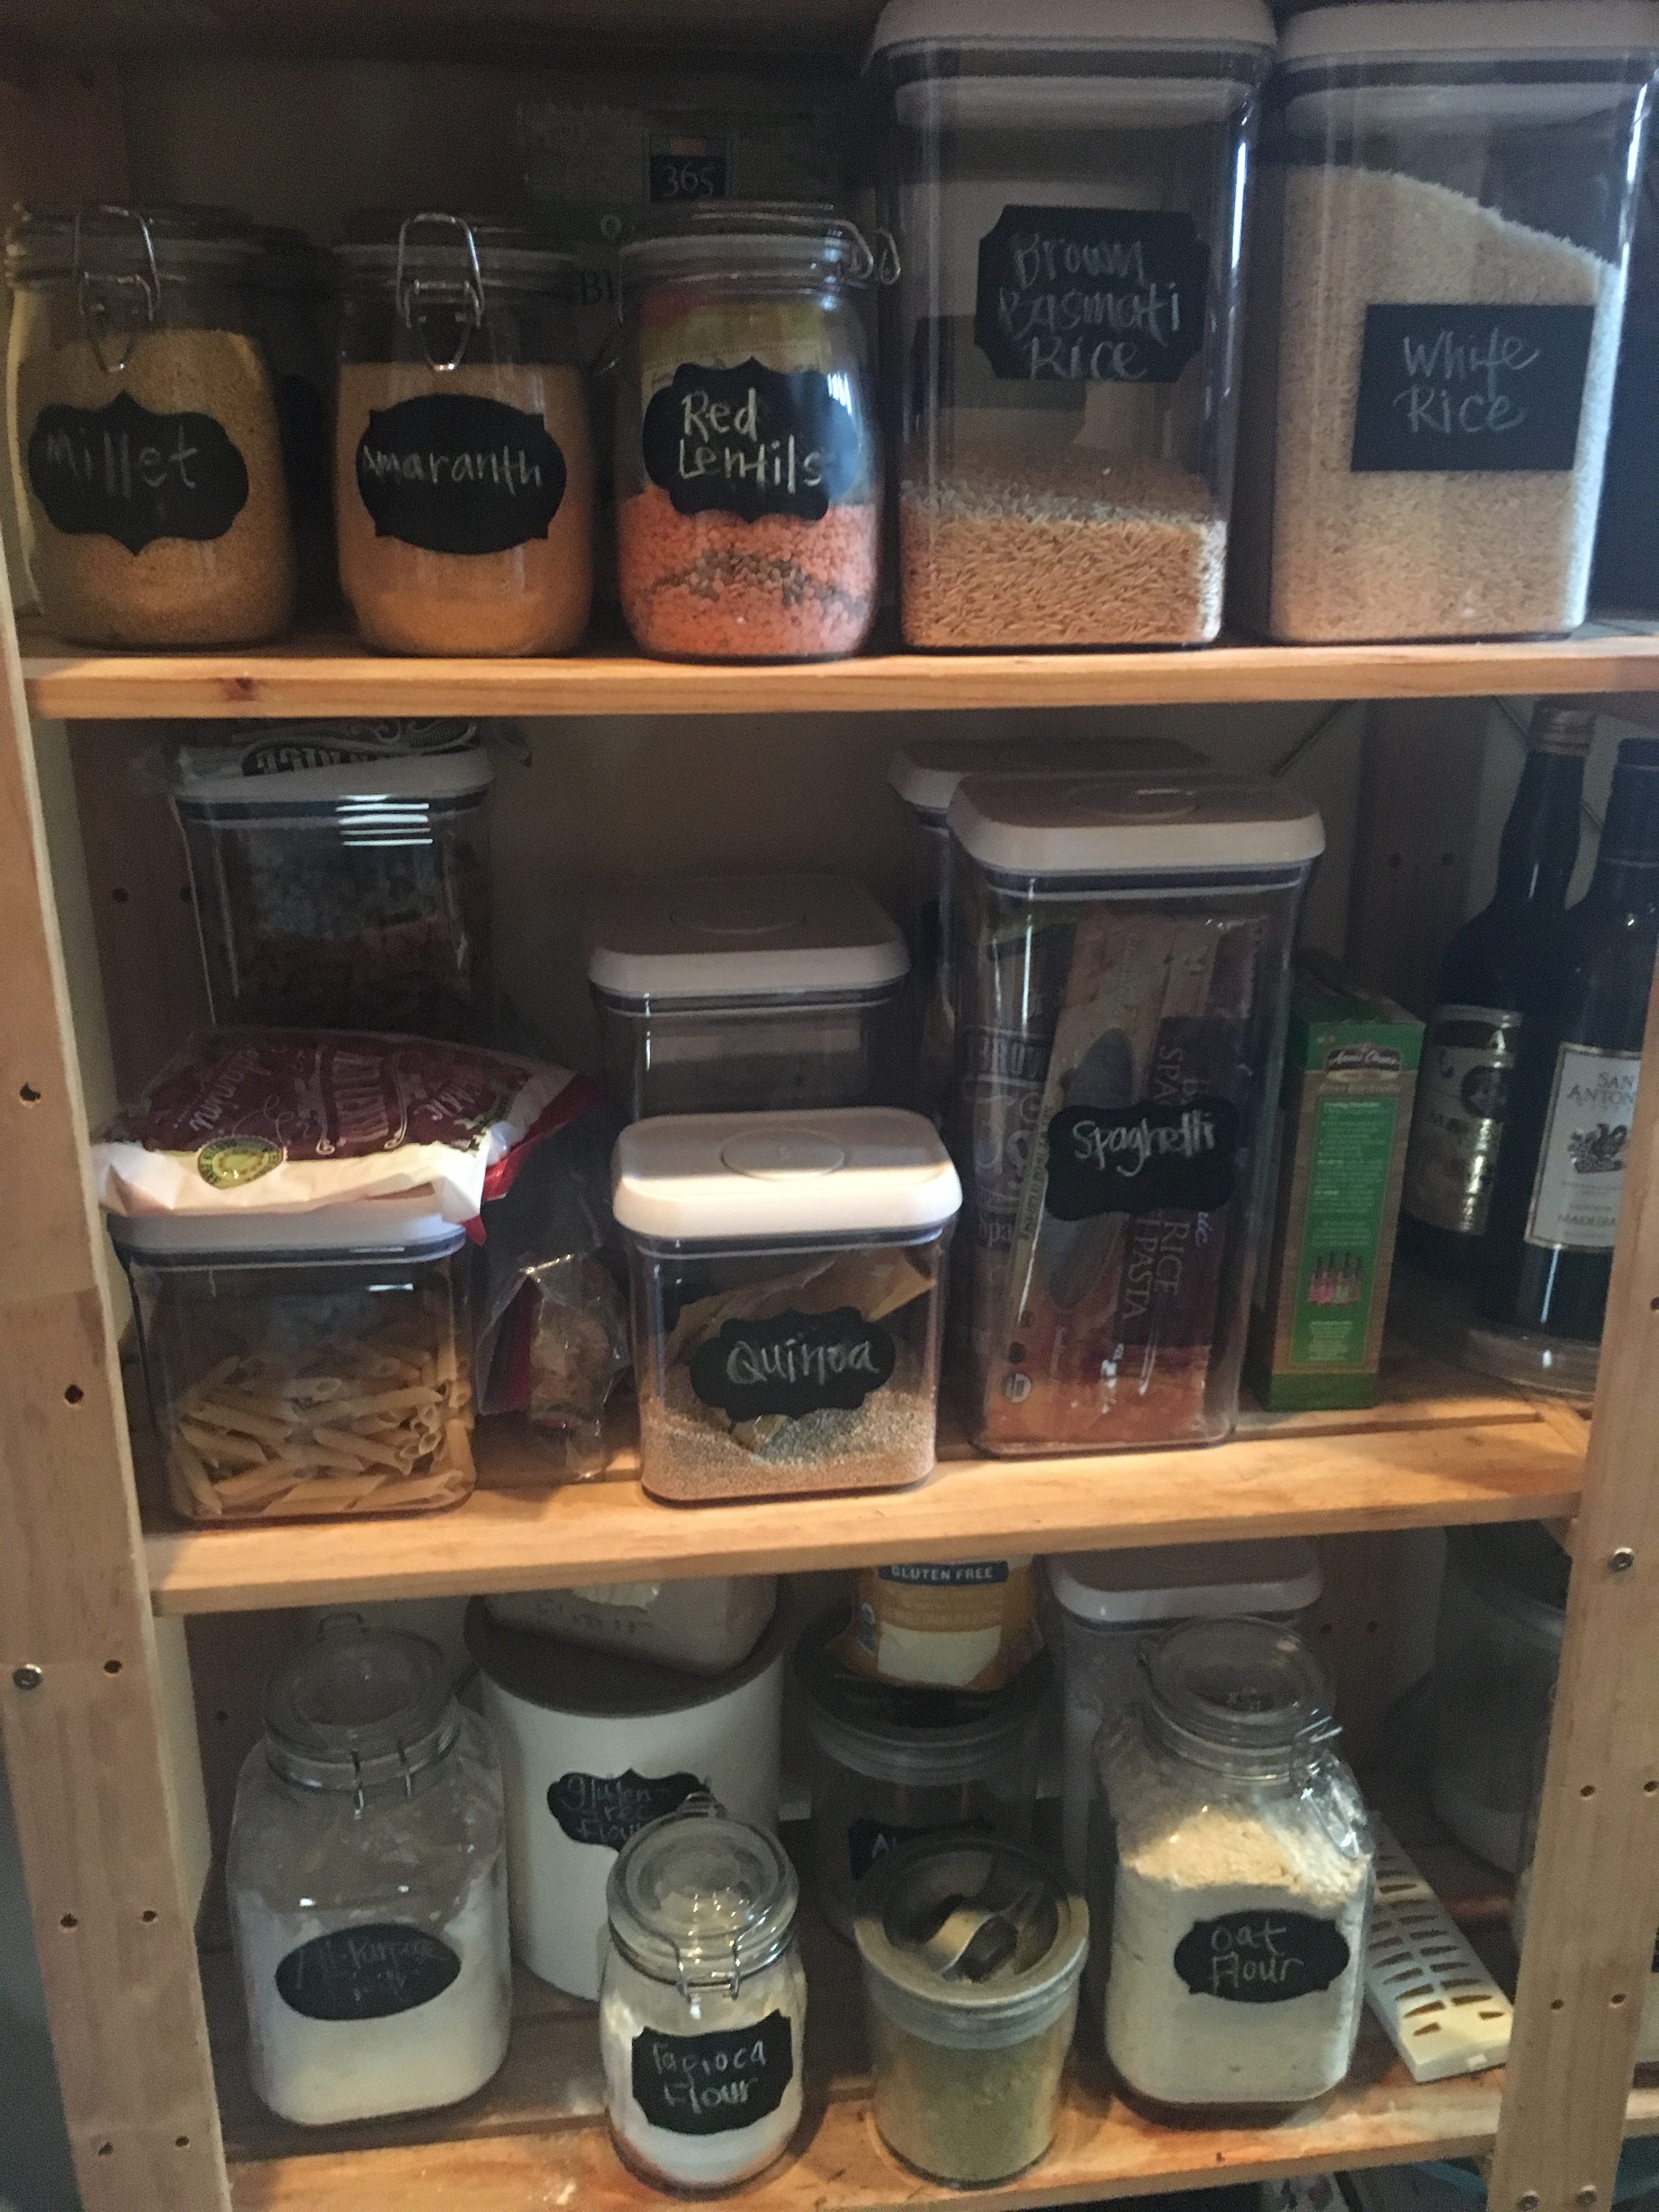 Organize Your Pantry with Clear Bins for Easy Meal Preparation